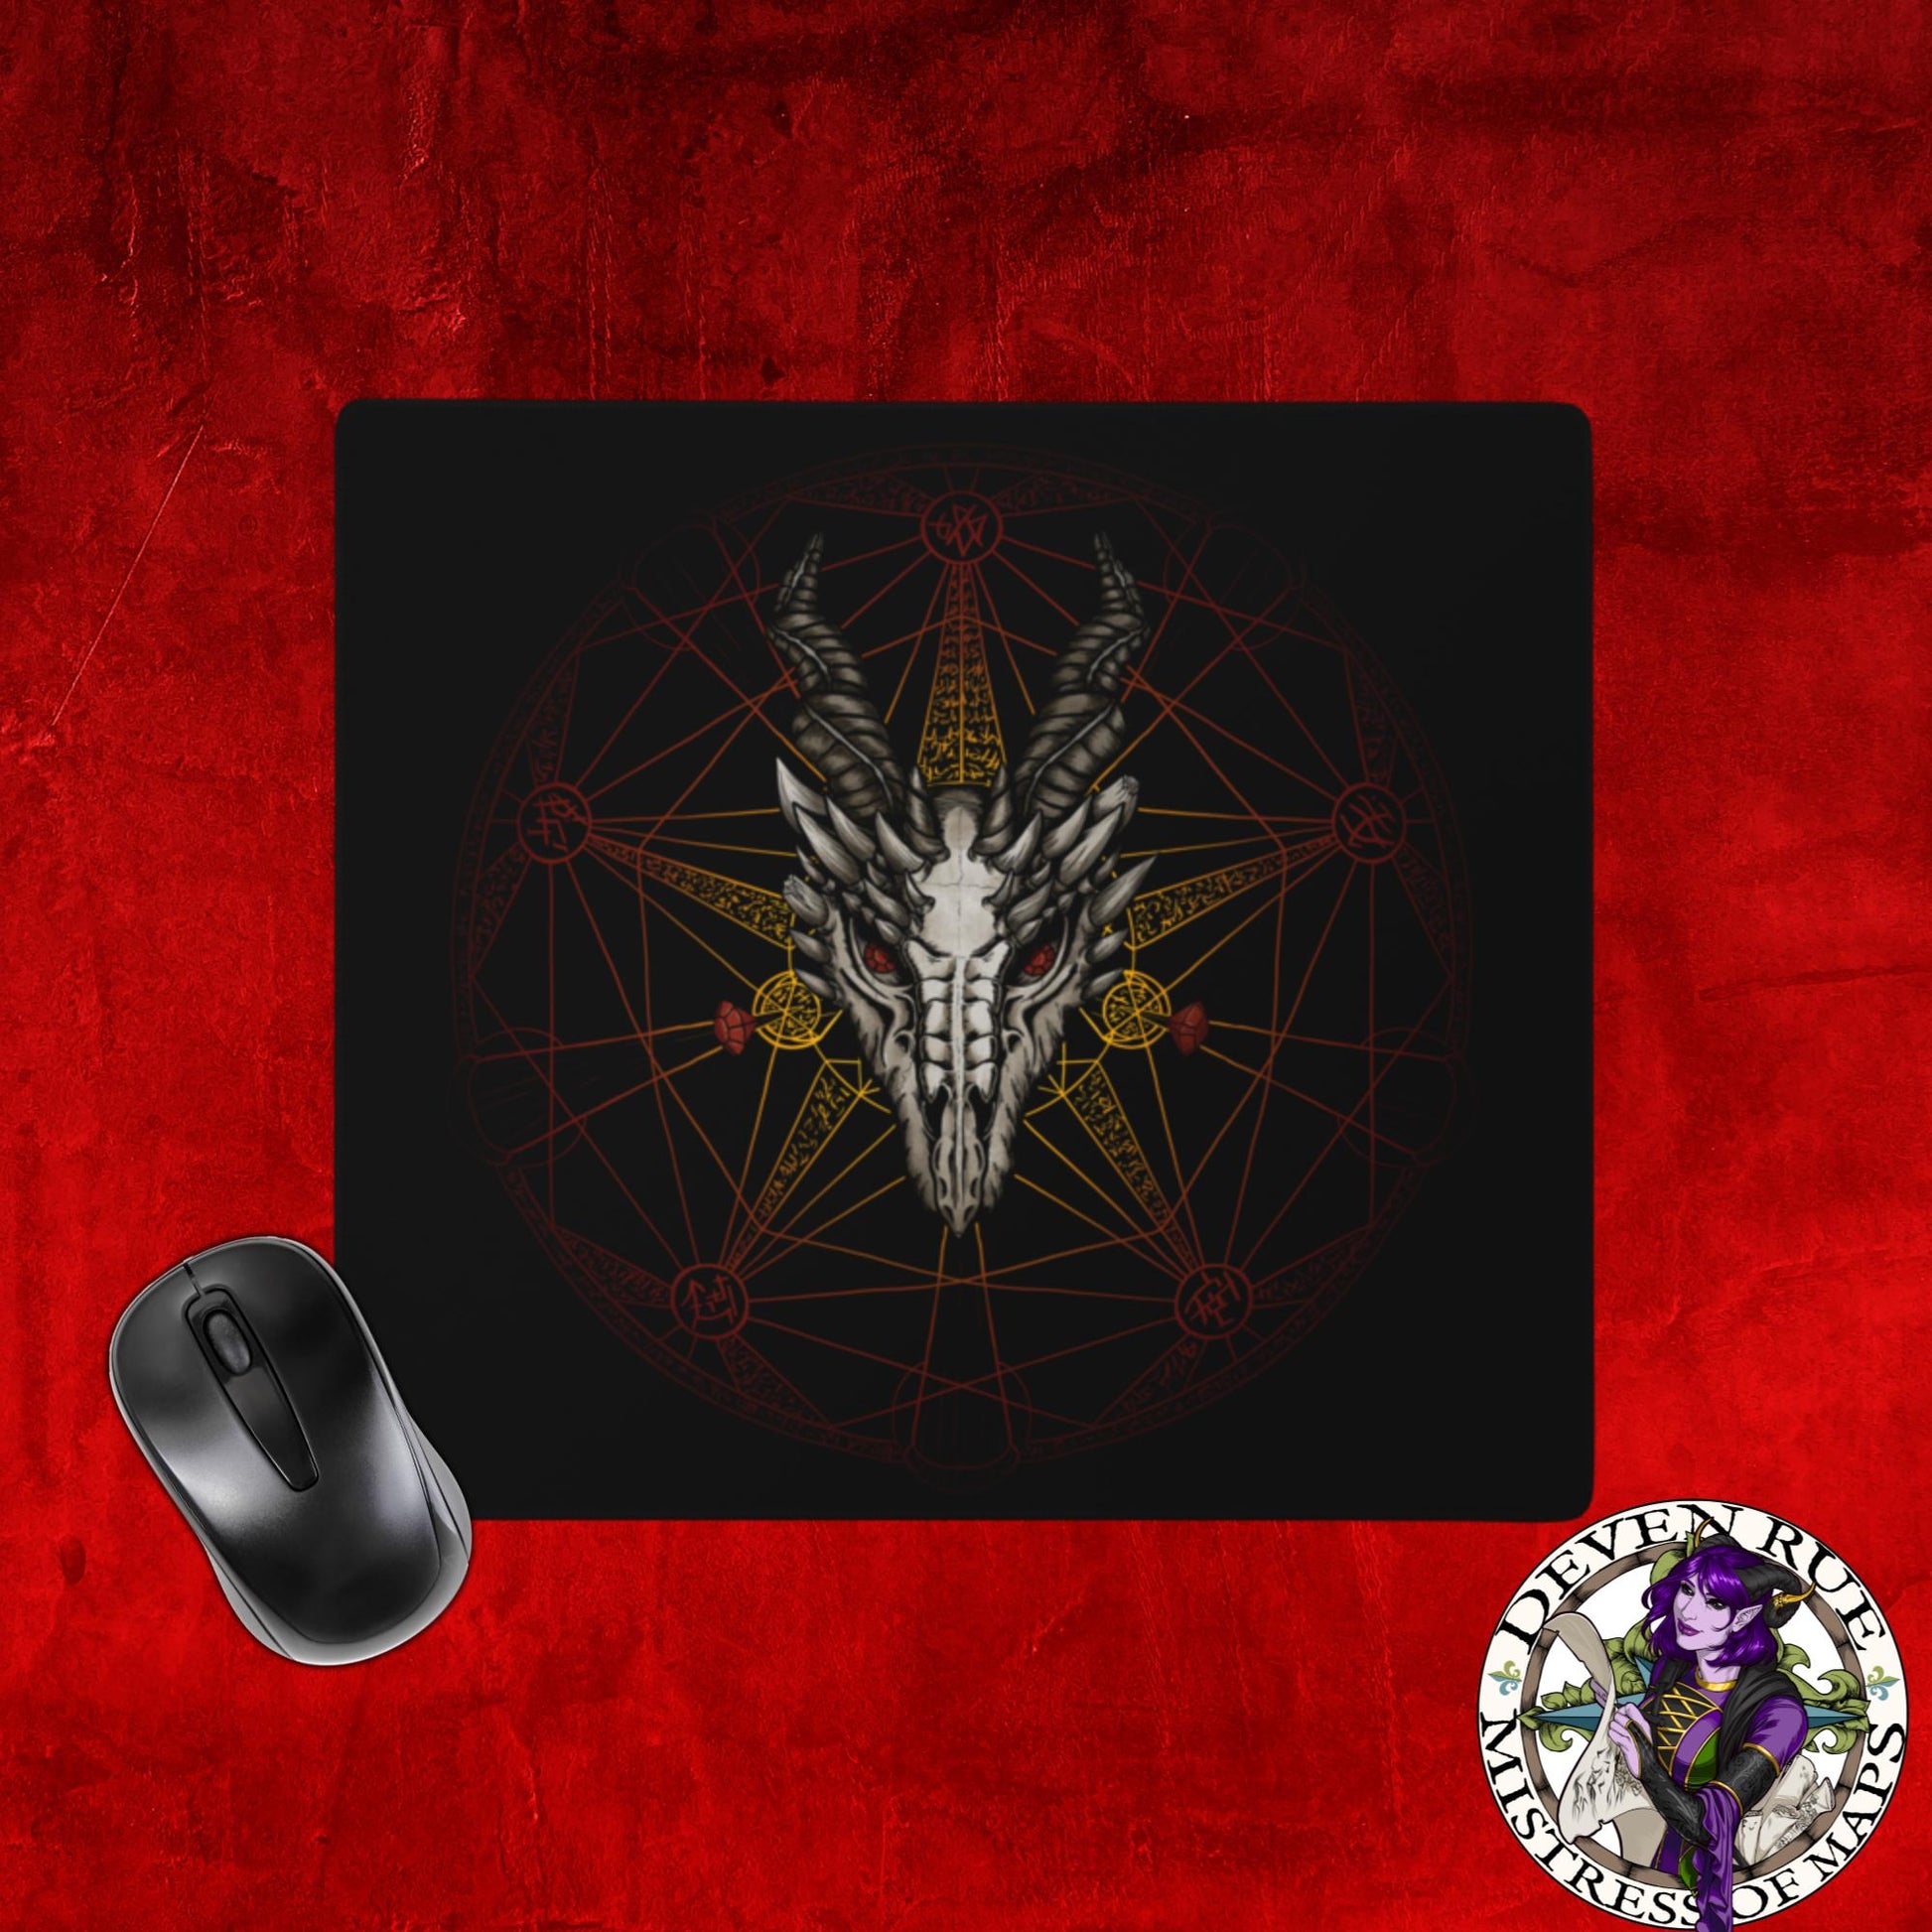 The smaller gaming mouse pad (18x16") with the red dragon summoning circle on it.